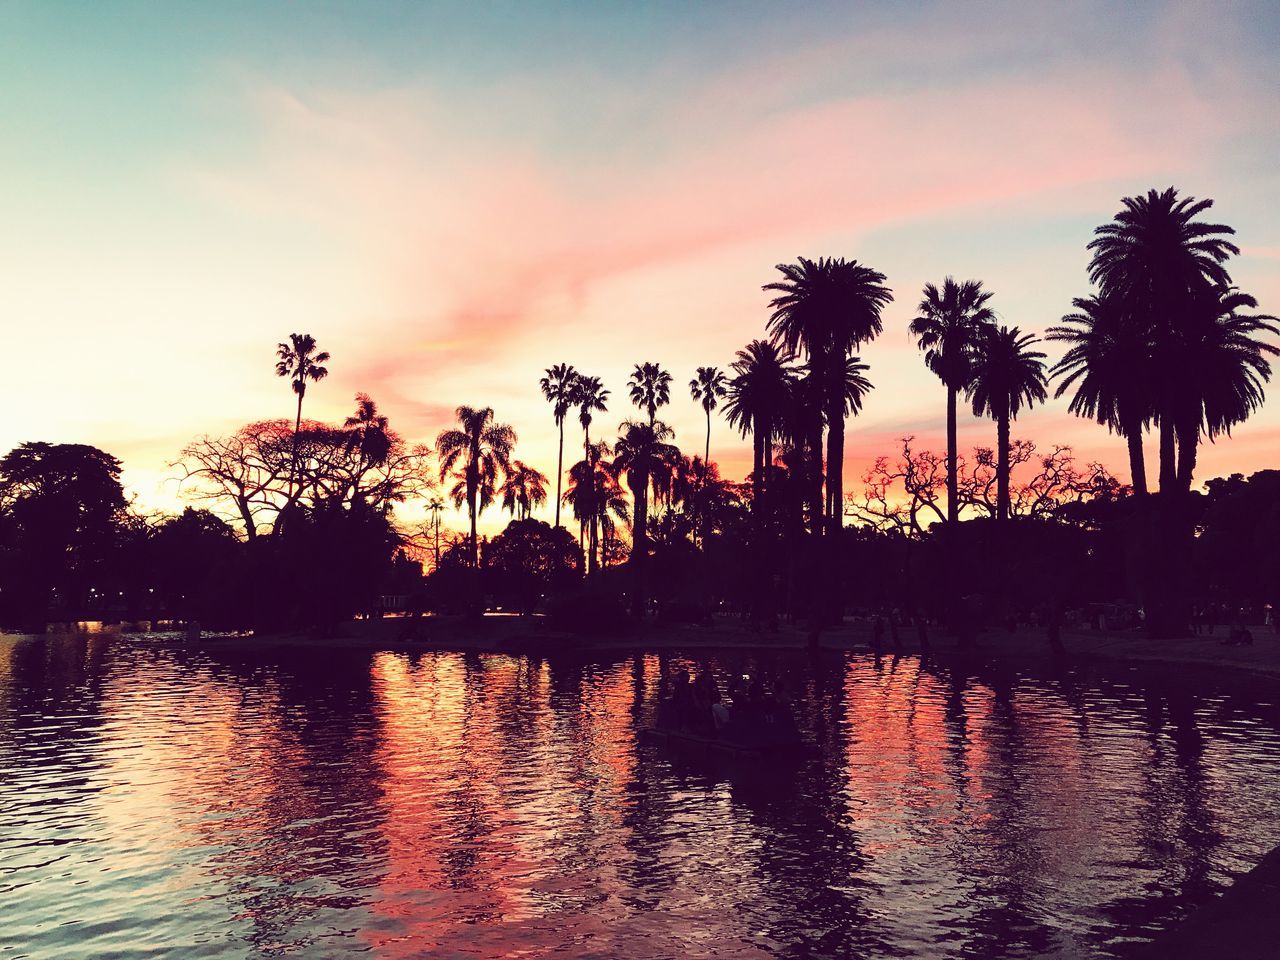 SILHOUETTE PALM TREES BY LAKE AGAINST SKY DURING SUNSET